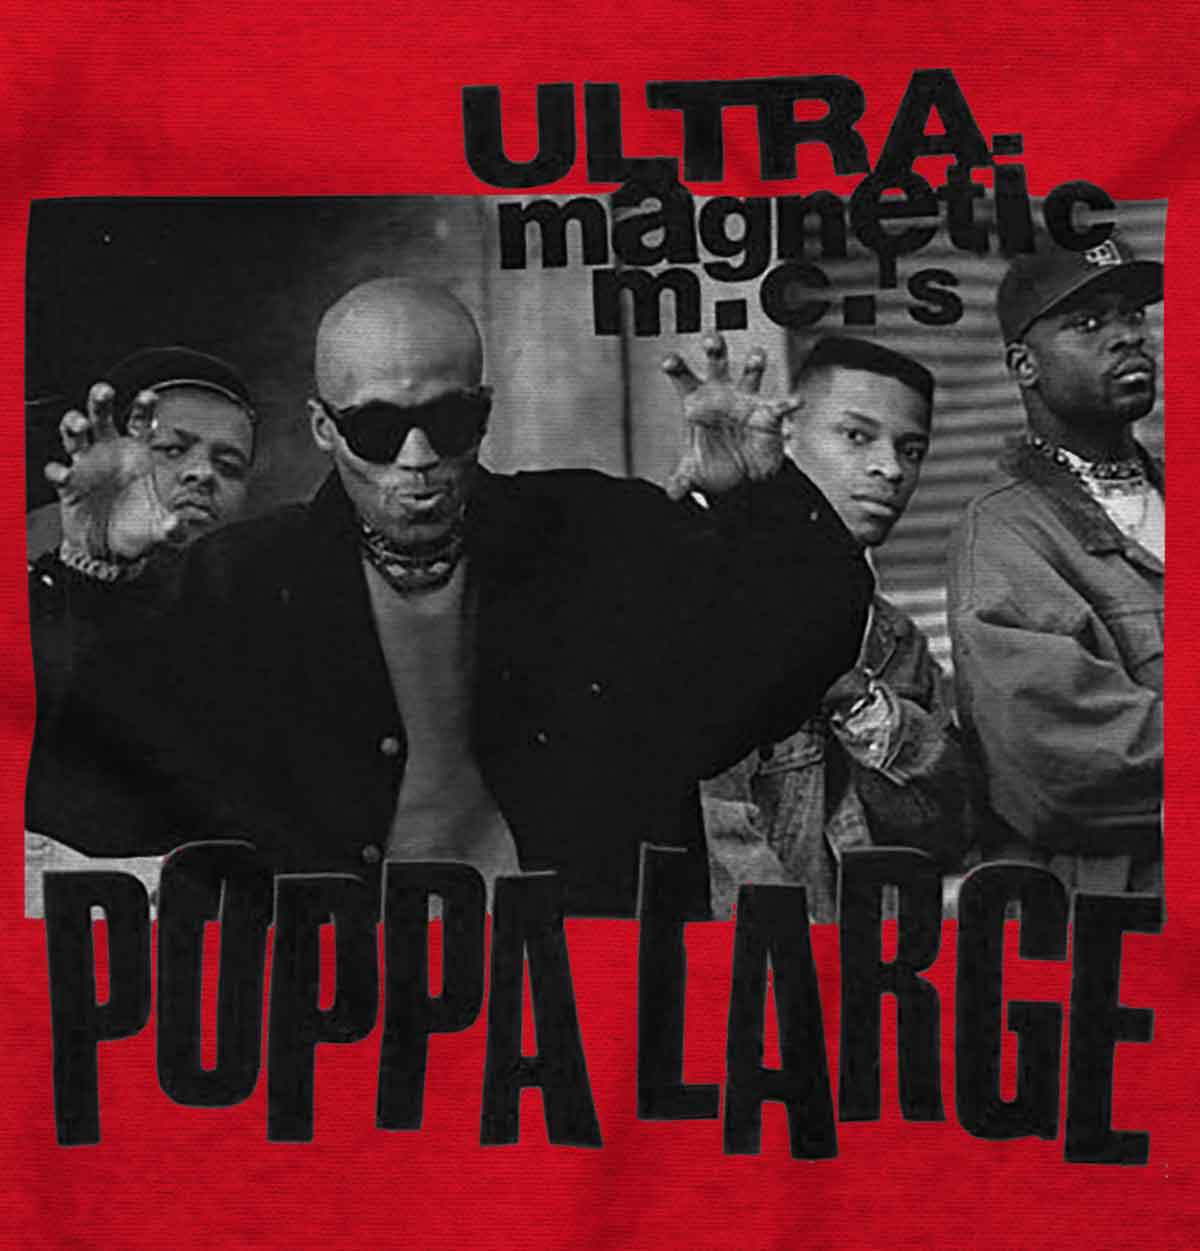 This image is a poster from the 90s hip-hop era featuring the iconic crew, Ultra Magnetic M.Cs. The design boldly showcases four influential figures with their names in the background.